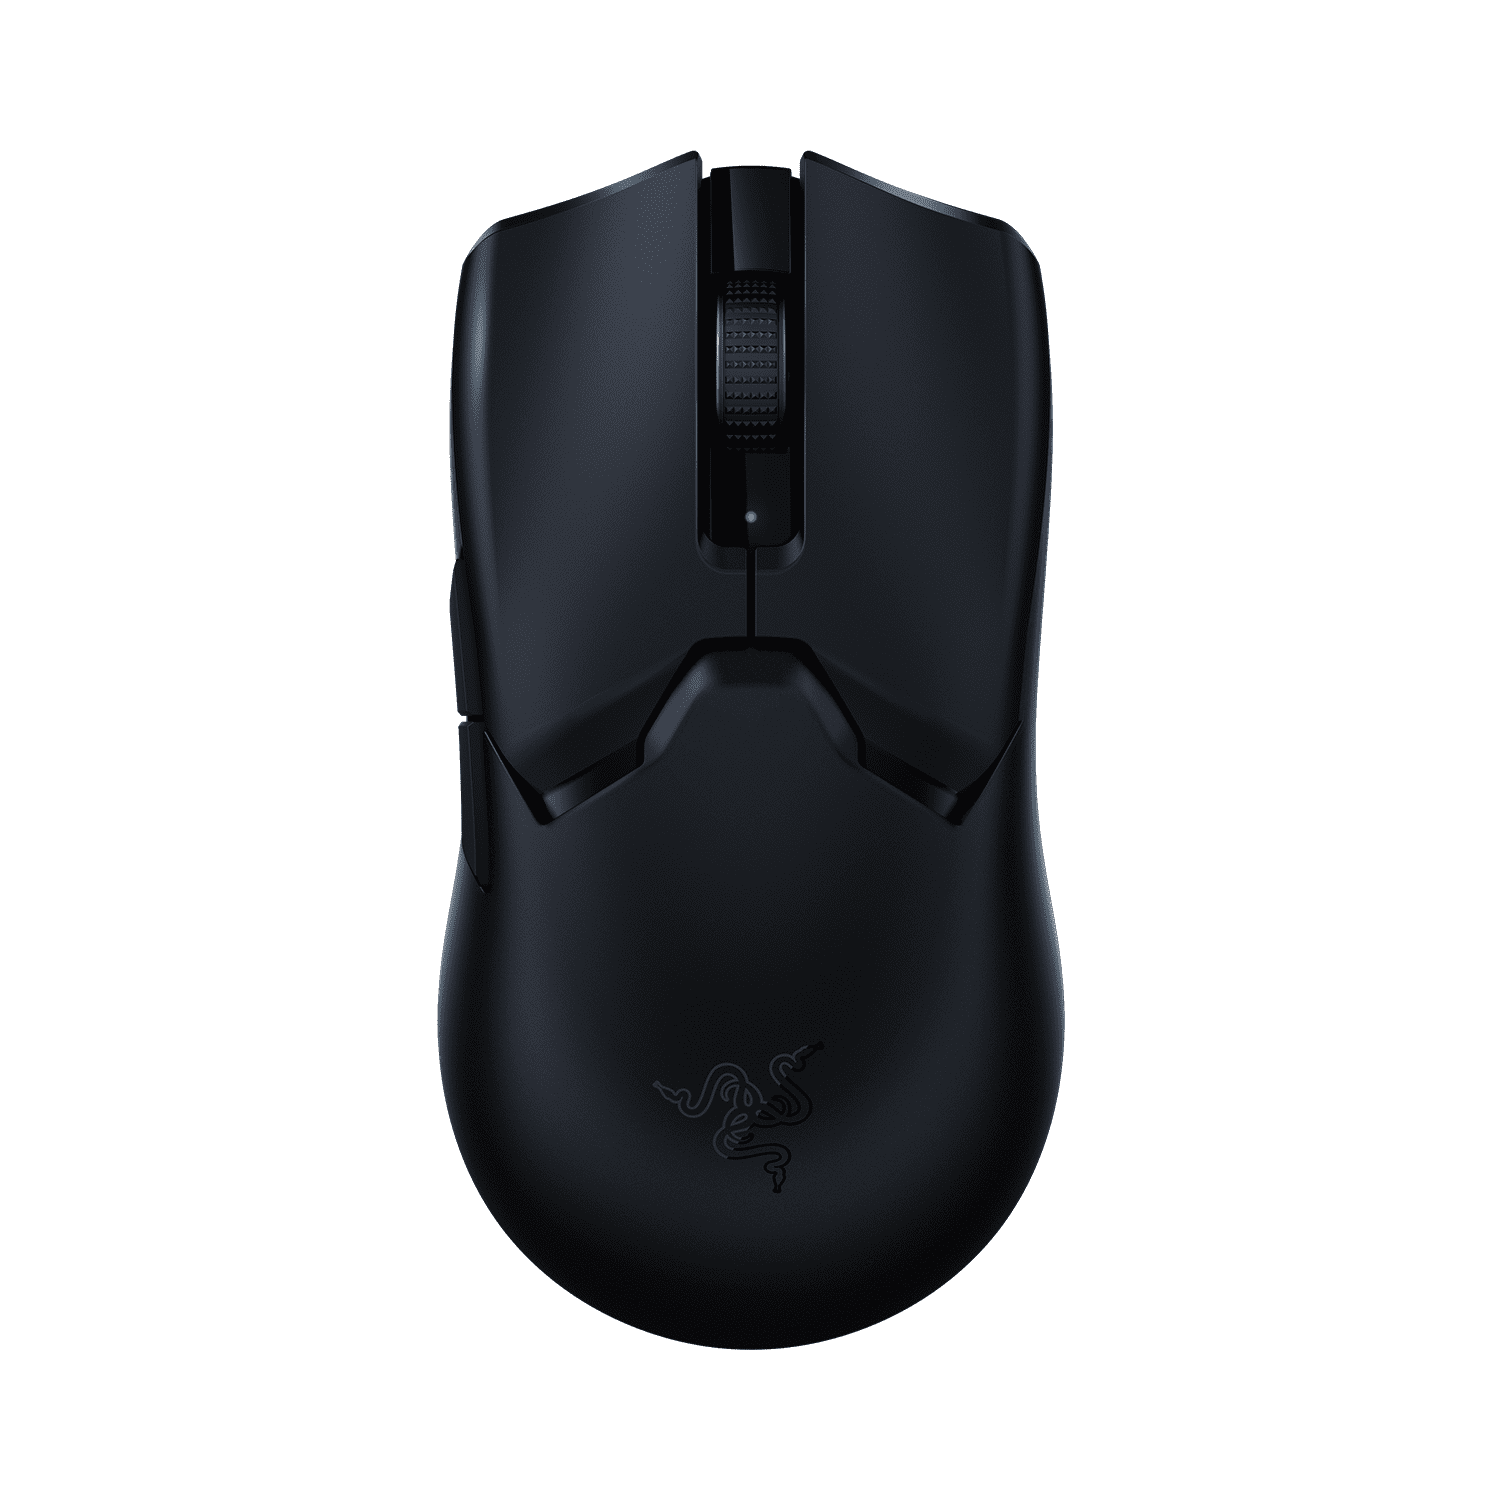 Razer announces Viper V2 Pro gaming mouse weighing just 58 grams with 30K  sensor